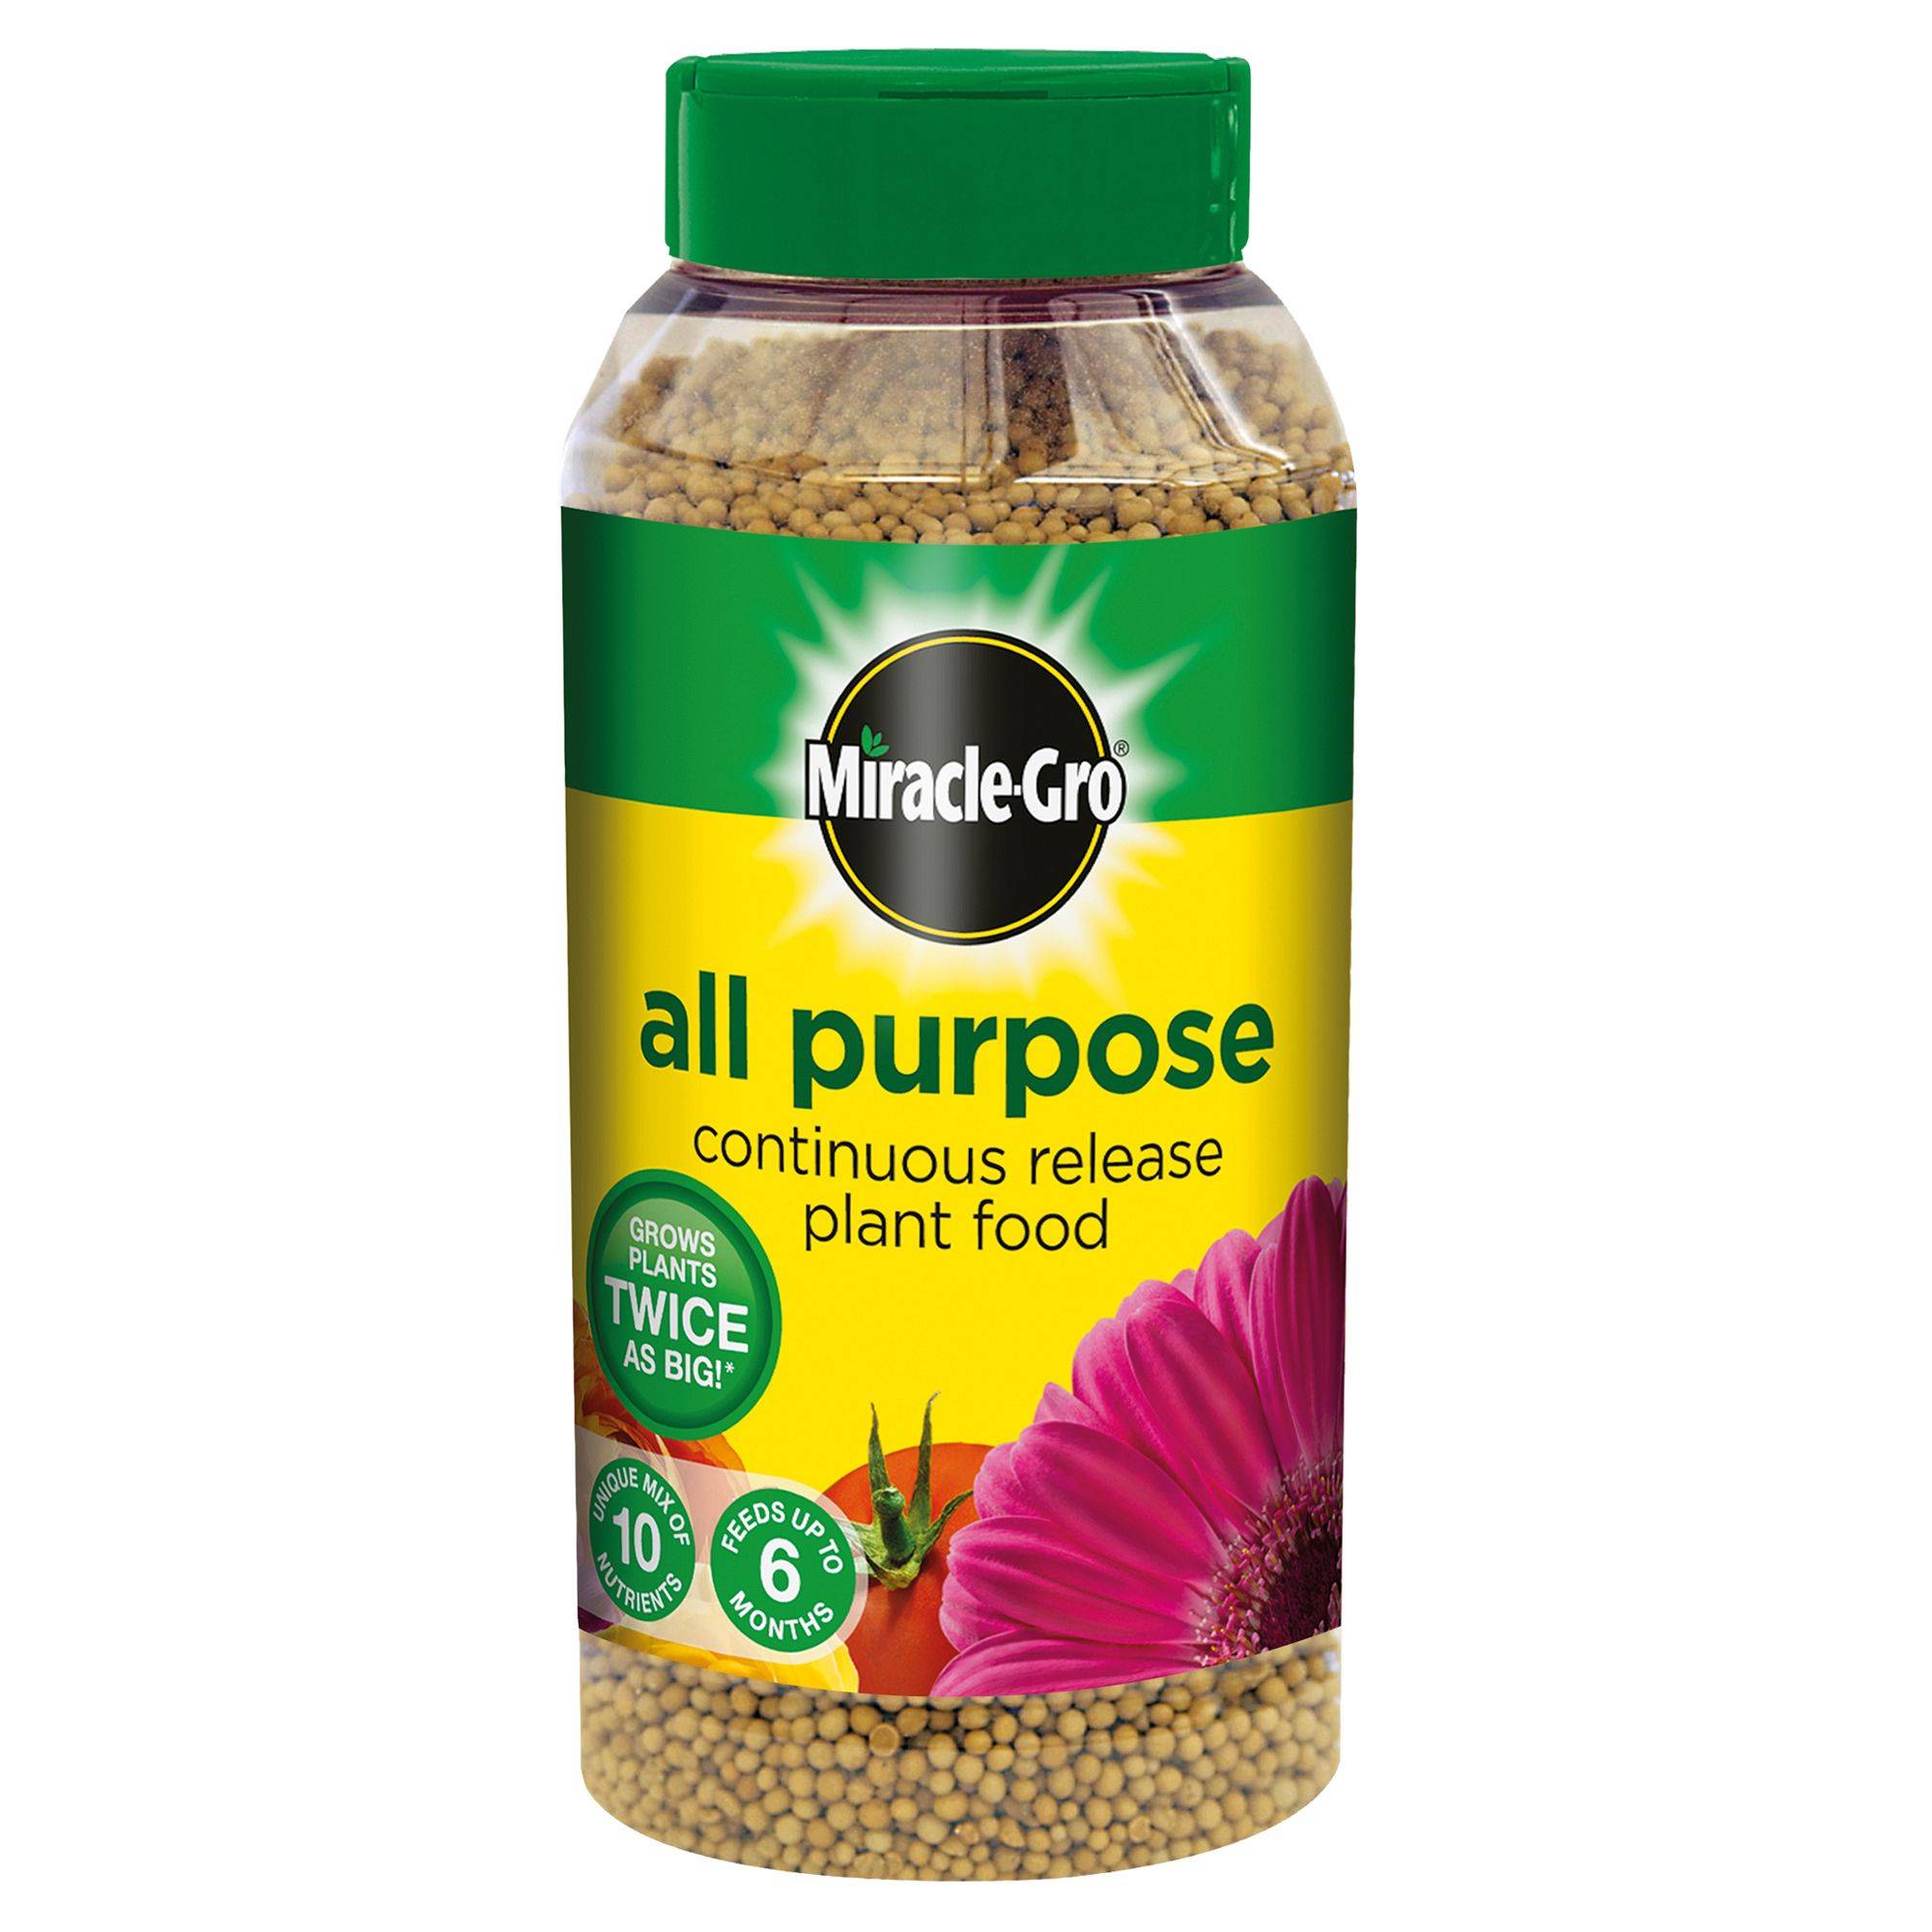 Miracle Gro Slow Release All Purpose Plant Food - 1kg